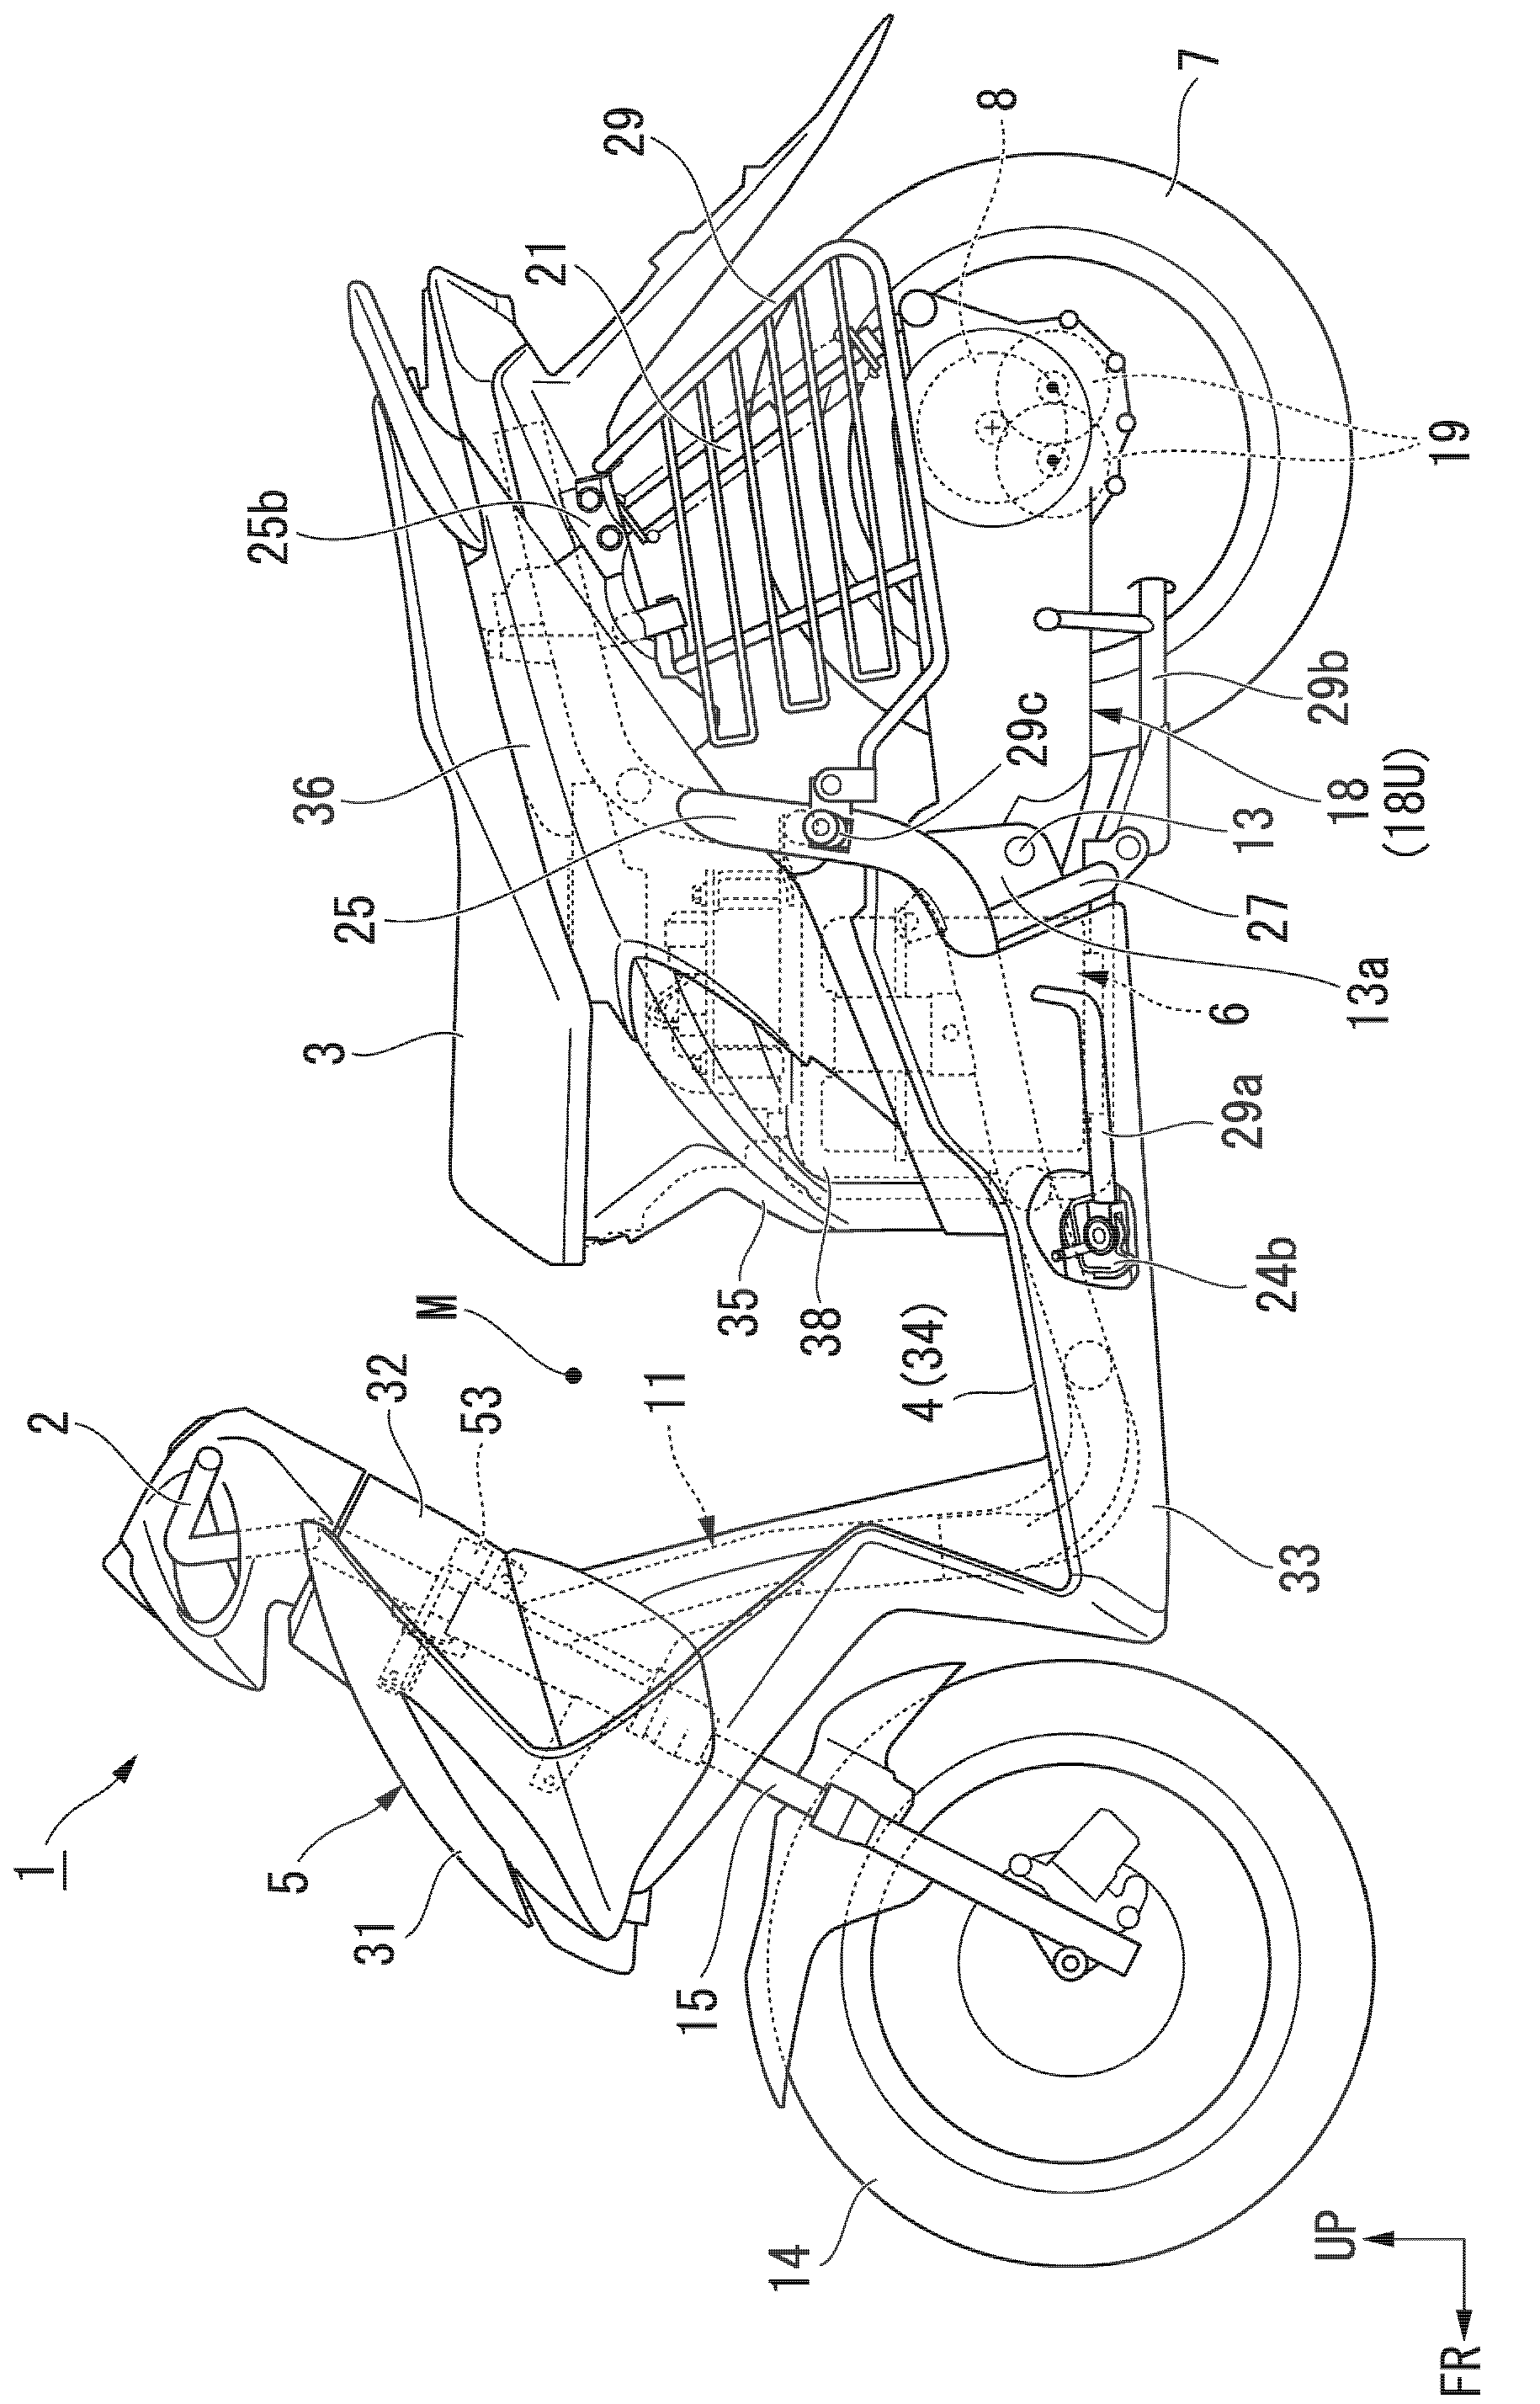 Electric saddled vehicle, and drive device for electric vehicle